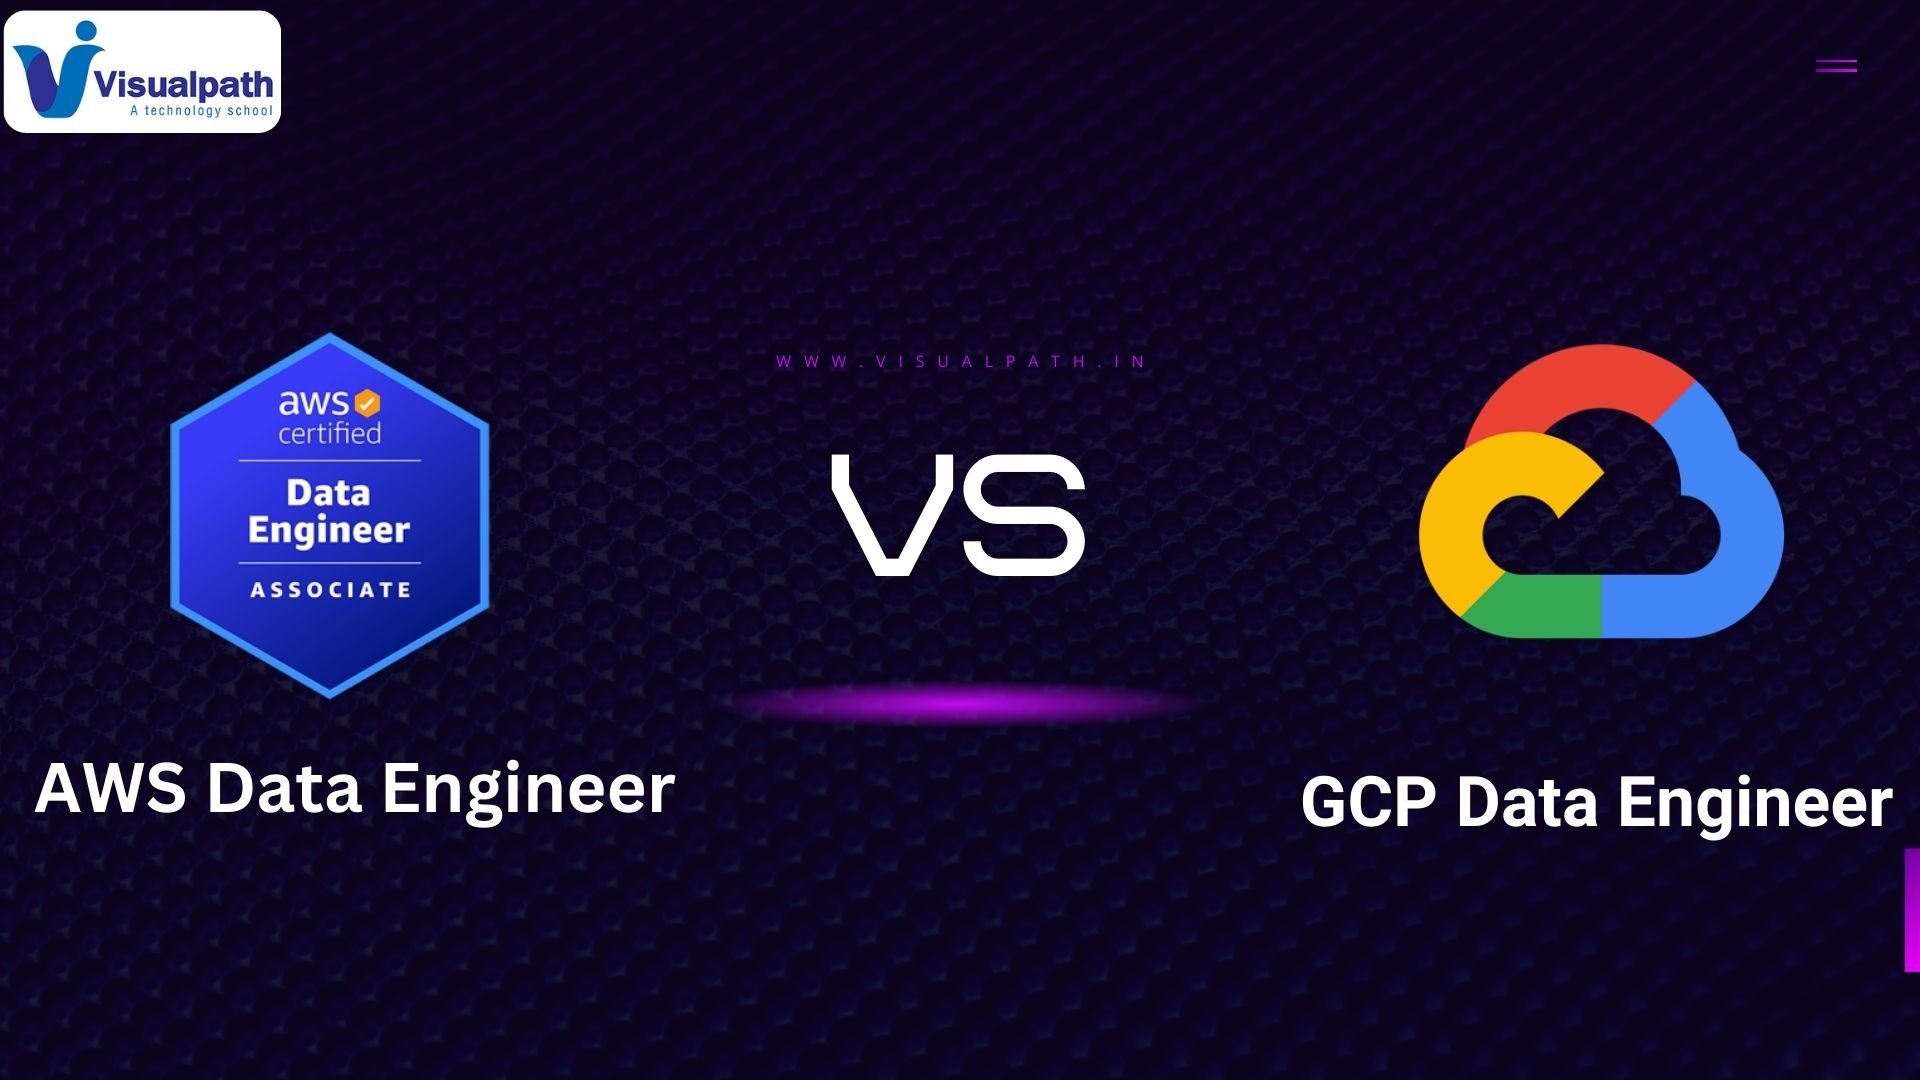 The Difference Between an AWS Data Engineer and a GCP Data Engineer?